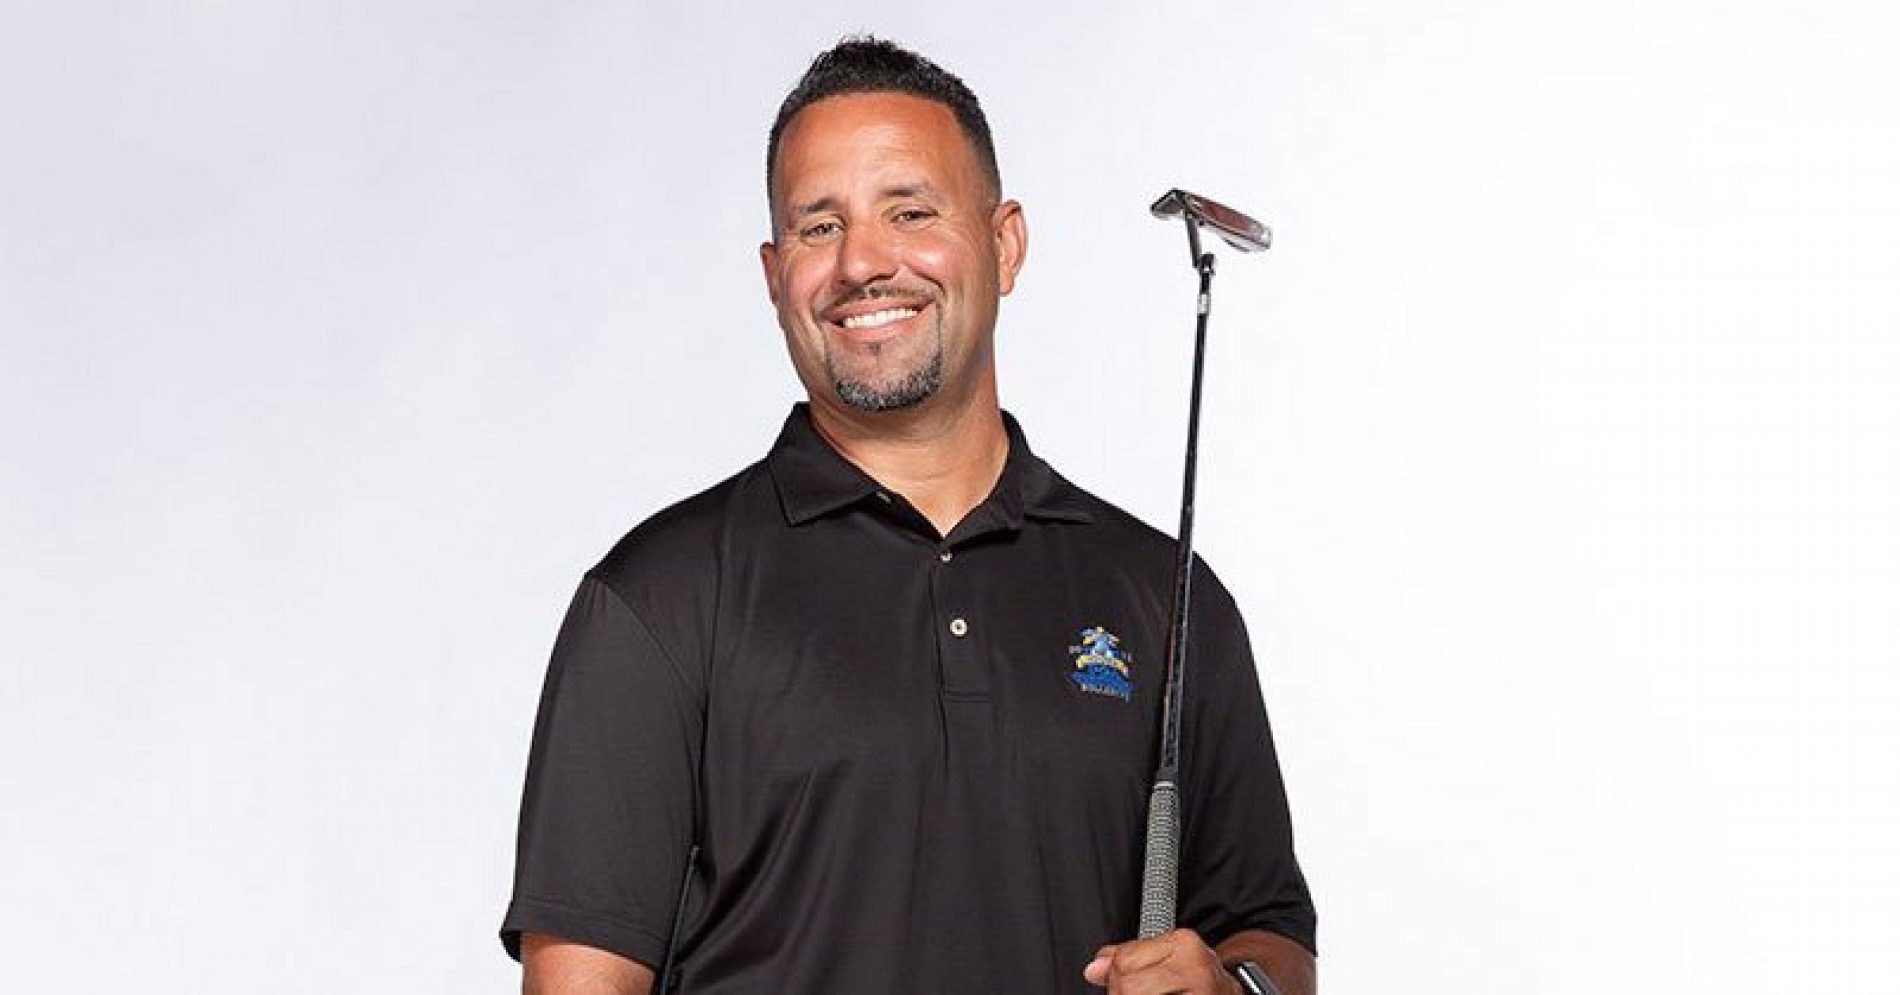 Interview with Carlos Arraya from Bellerive Country Club